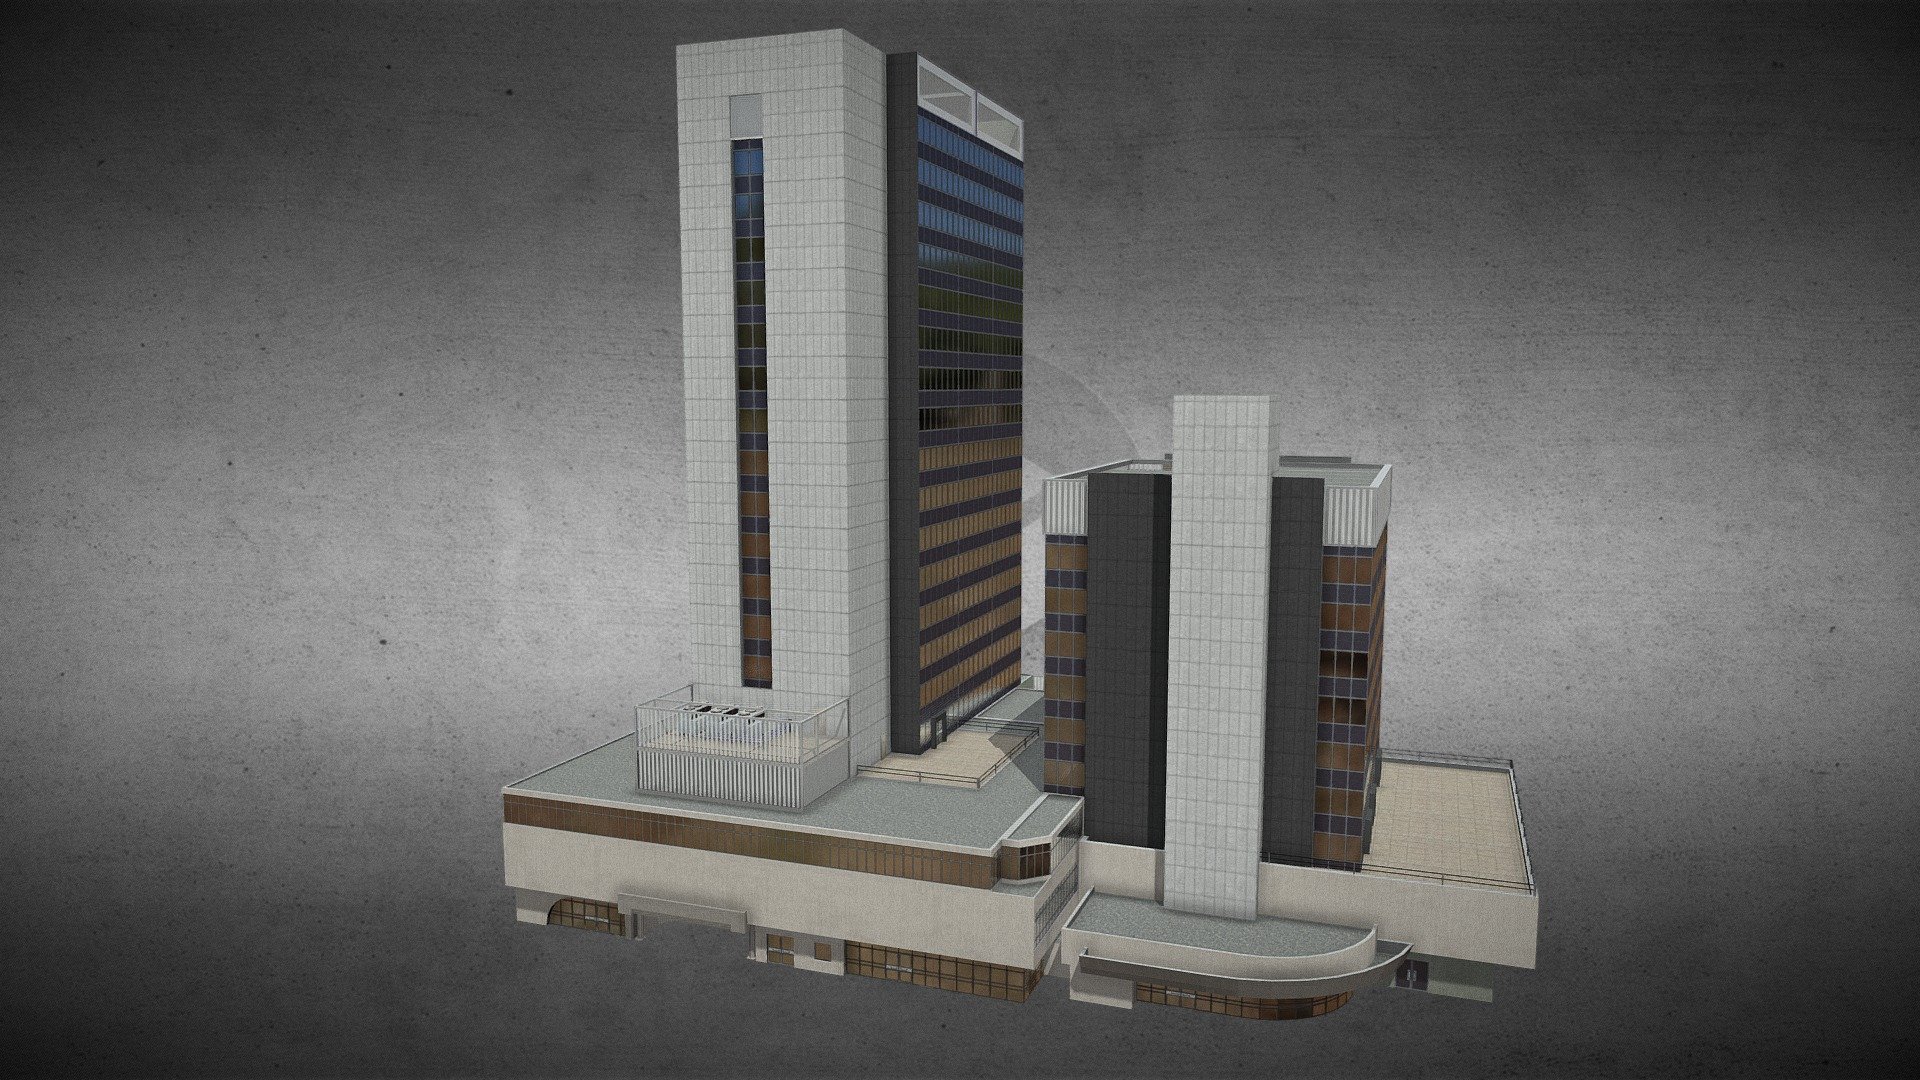 City Towers

Puerto Rico, 252 Av. Juan Ponce de León, San Juan, 00918, Porto Rico

Created and adapted for the game &ldquo;CitiesSkylines